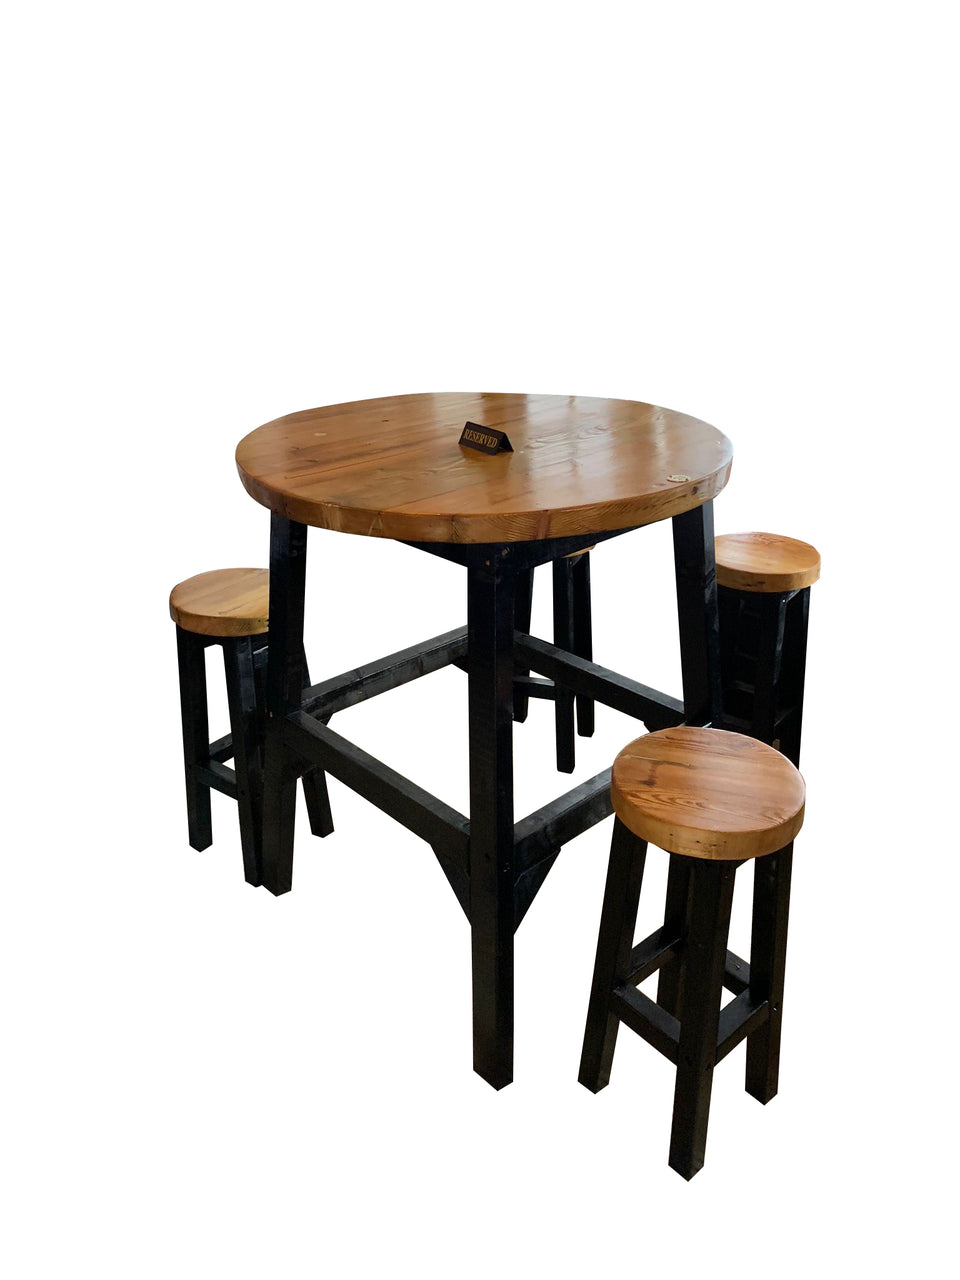 Rustic Timber Breakfast Bar style dining table with stools